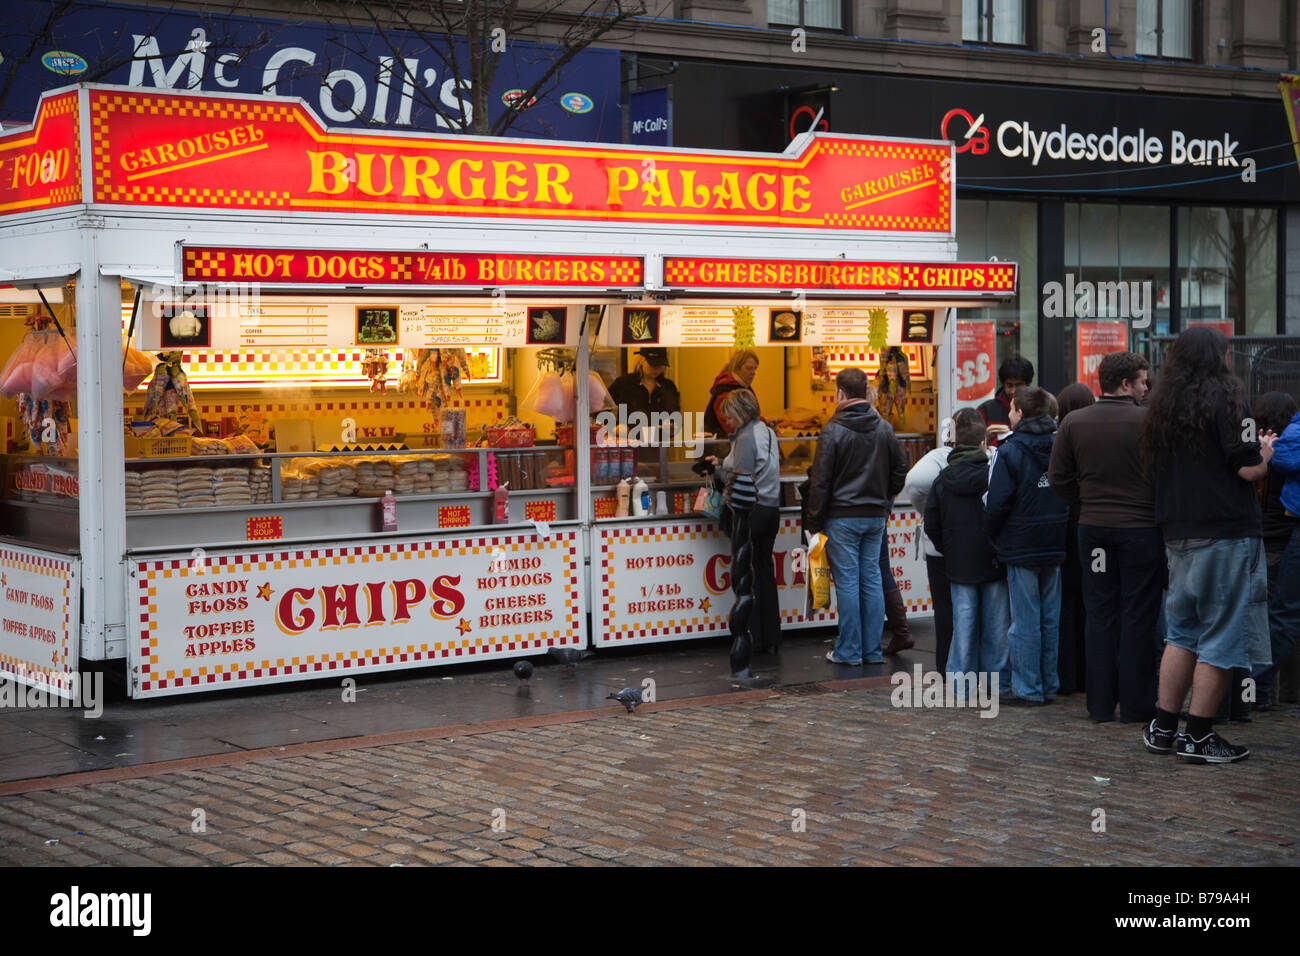 Queue for food & drink. Chips for Sale_The Burger Palace a Mobile Snack Van or takeaway, Dundee, Scotland, UK Stock Photo